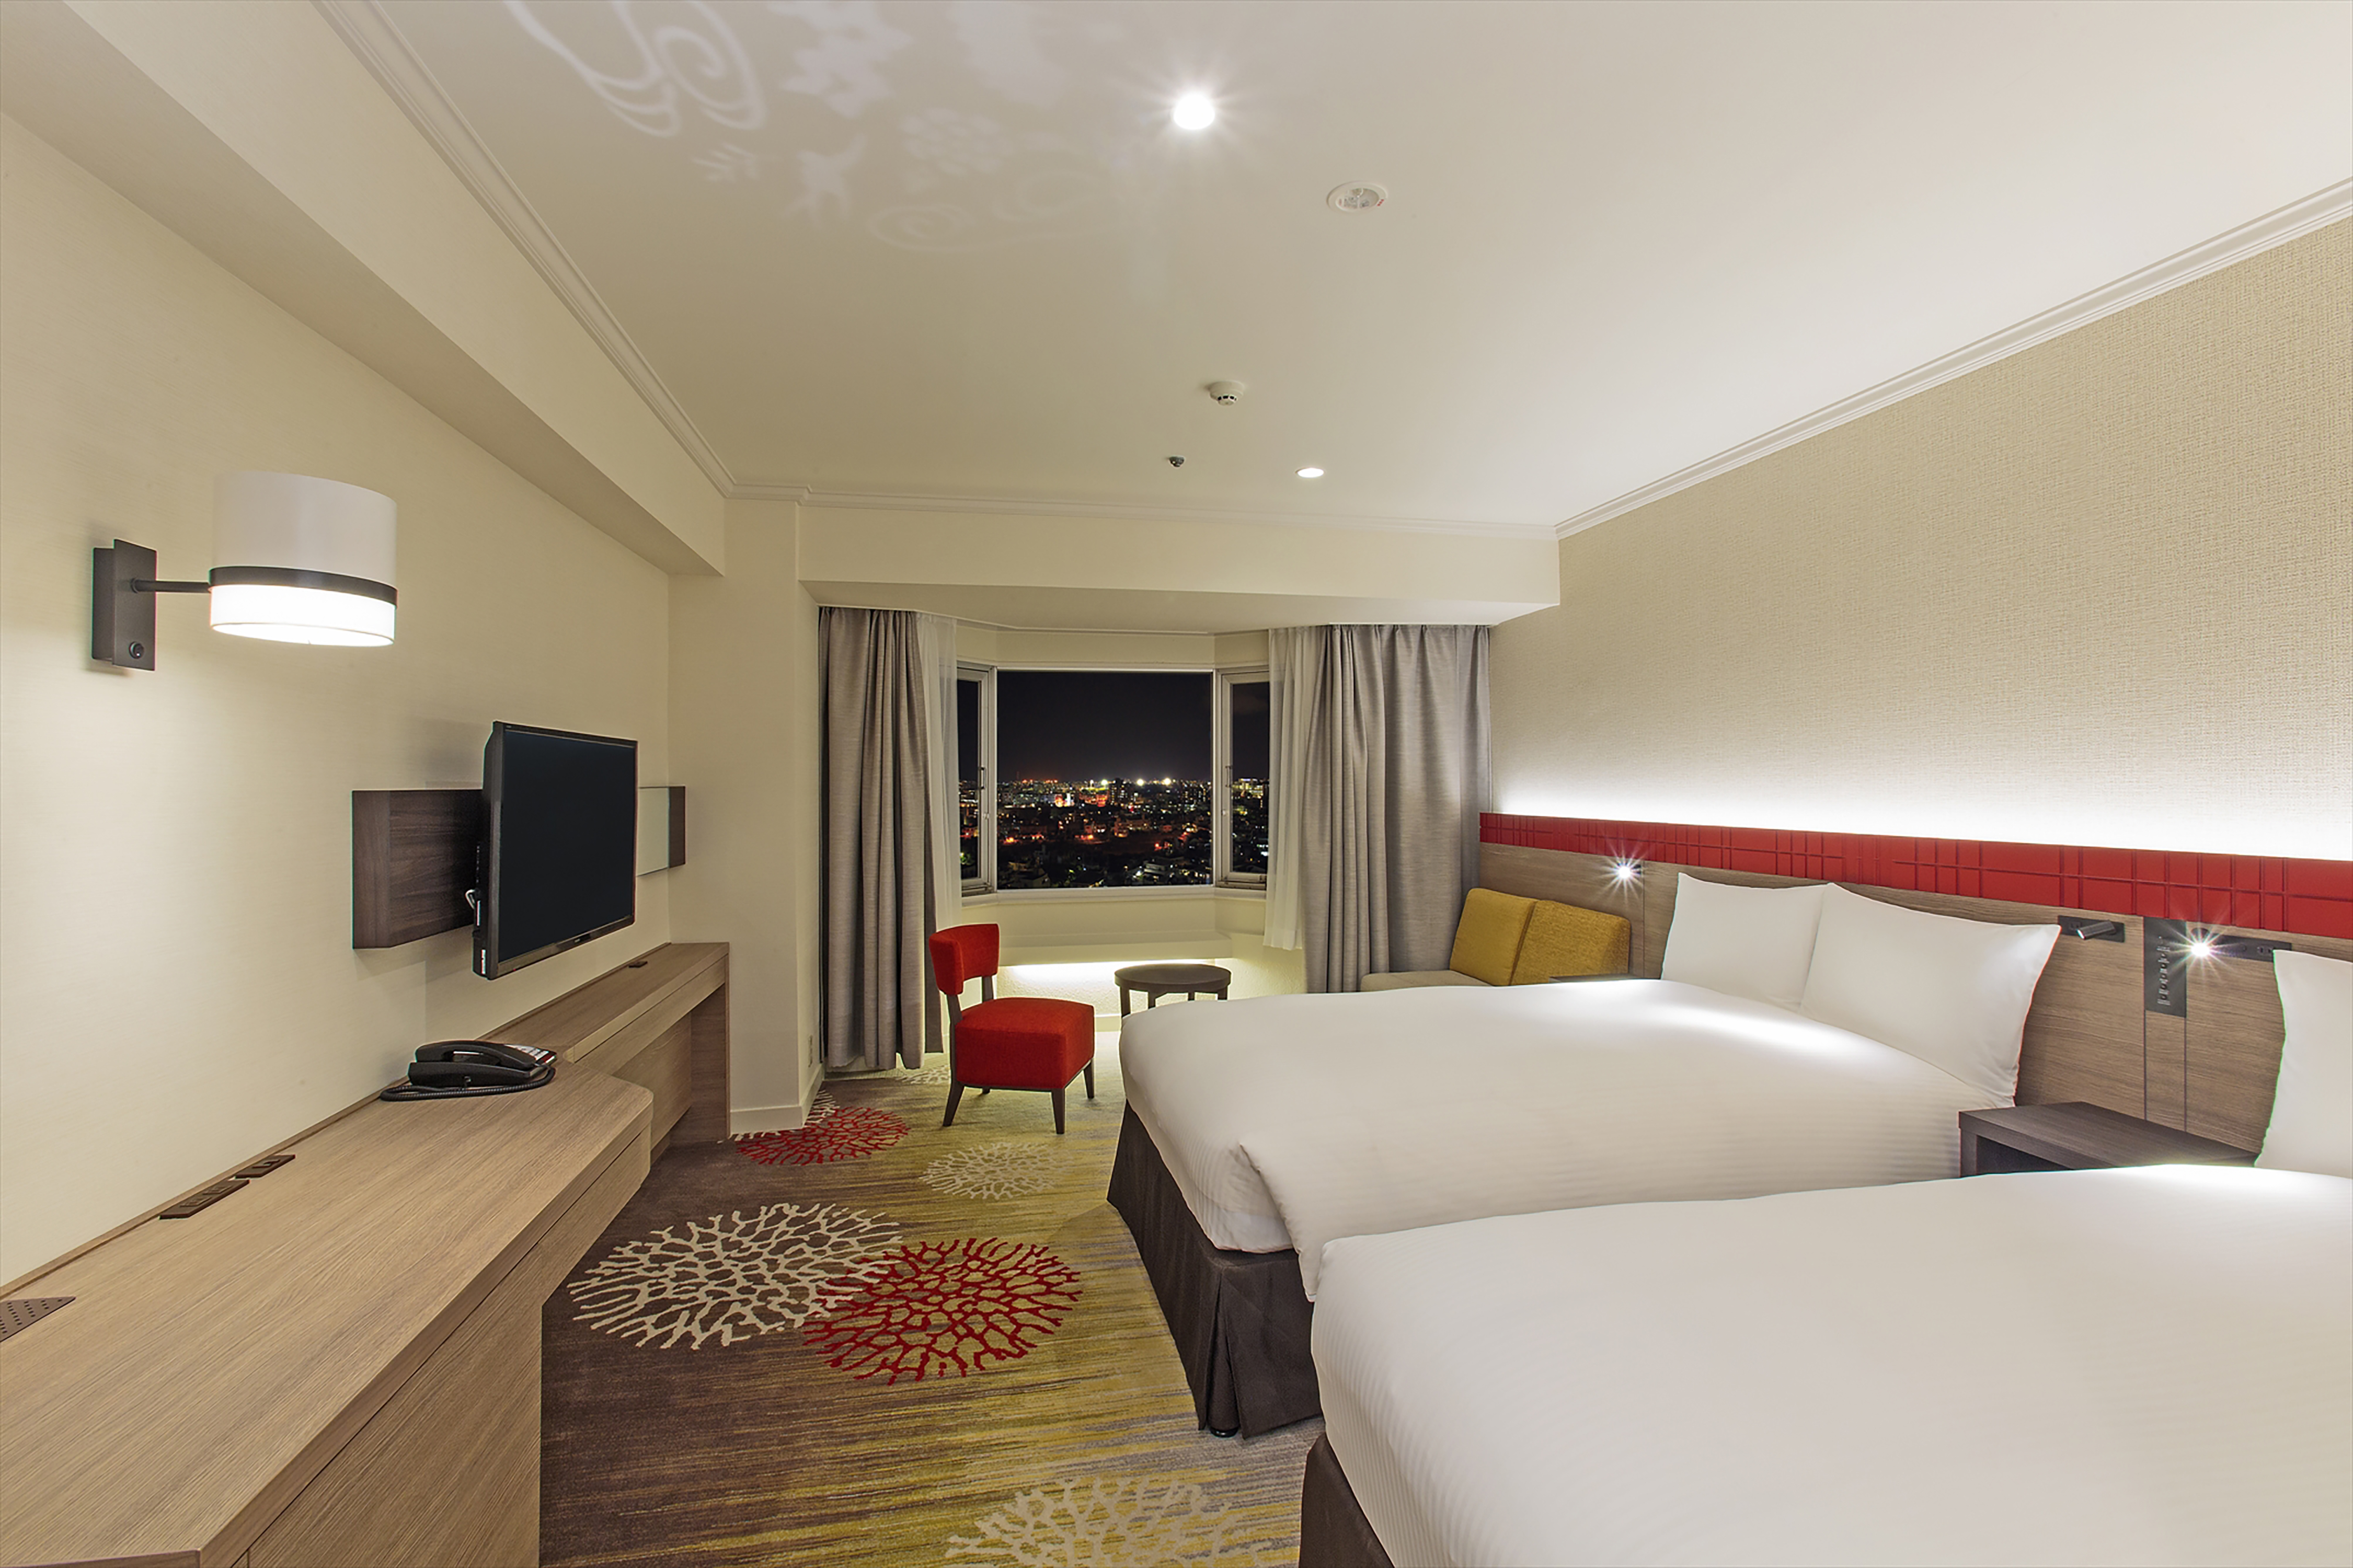 Twin Beds, TV, Red Chair and Coffee Table By Window With Open Drapes to Illuminated City at Night in Premium Room